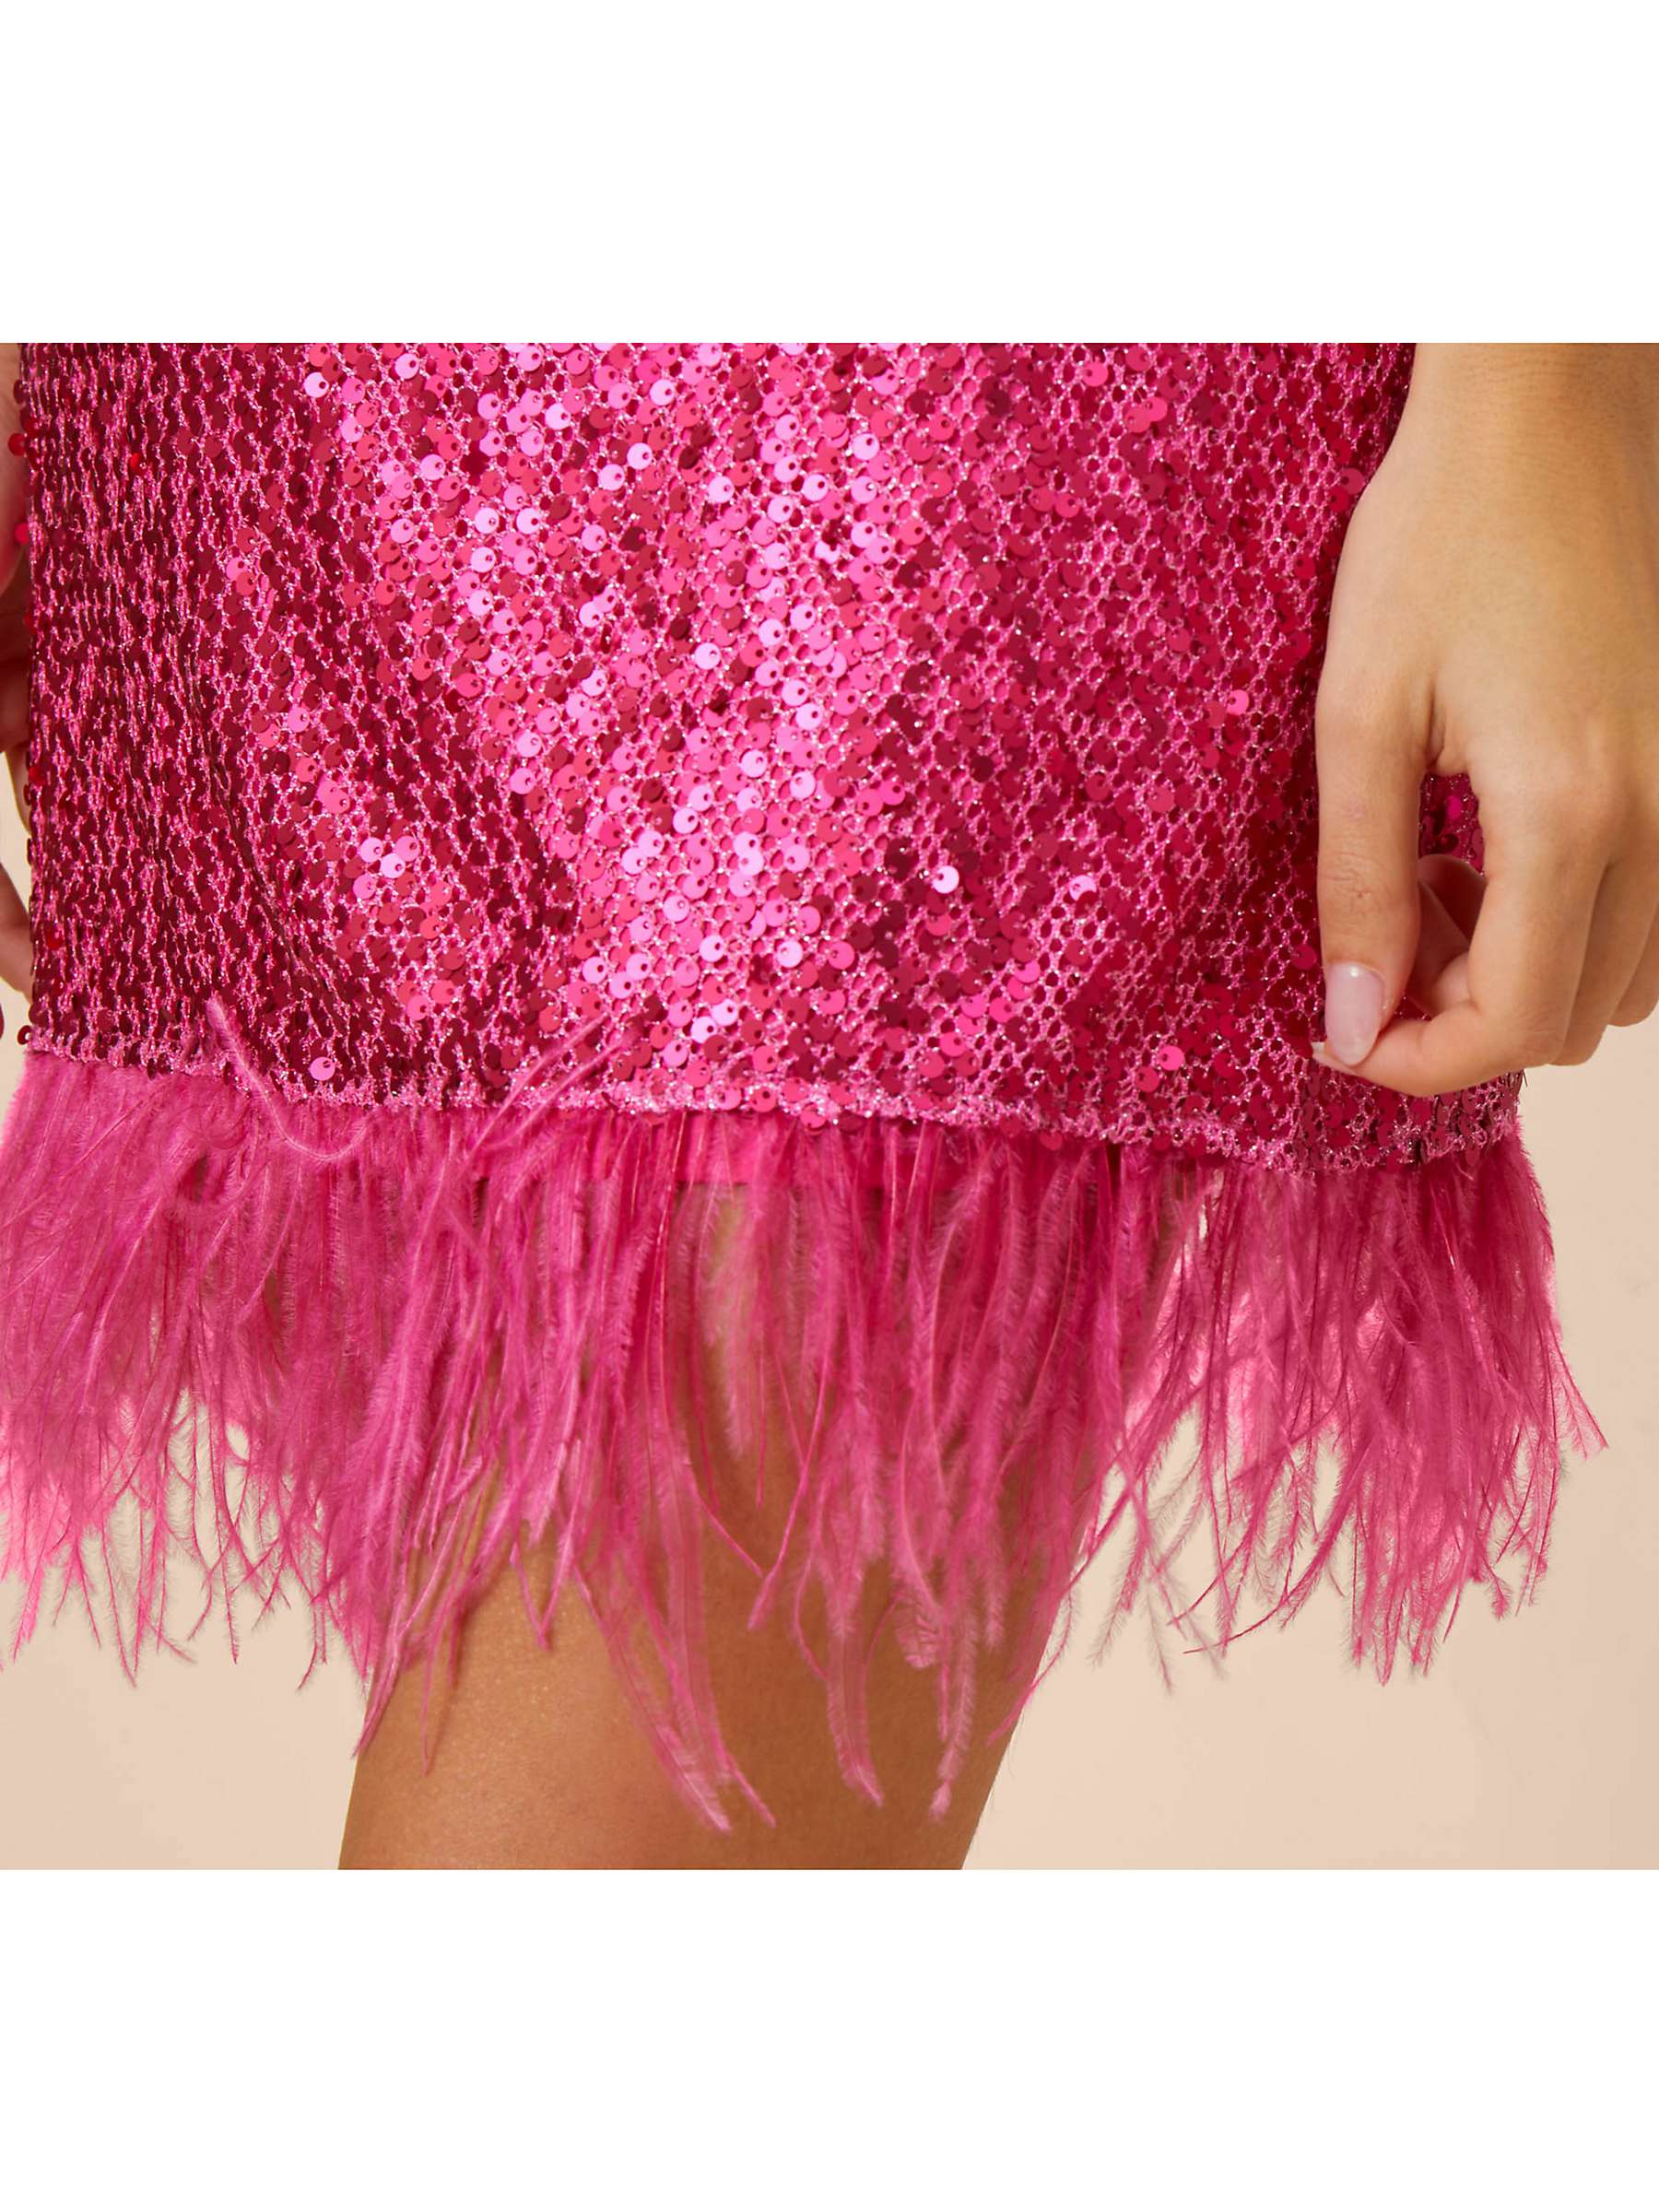 Buy Aidan by Adrianna Papell Sequin Halter Swing Dress, Hot Pink Online at johnlewis.com